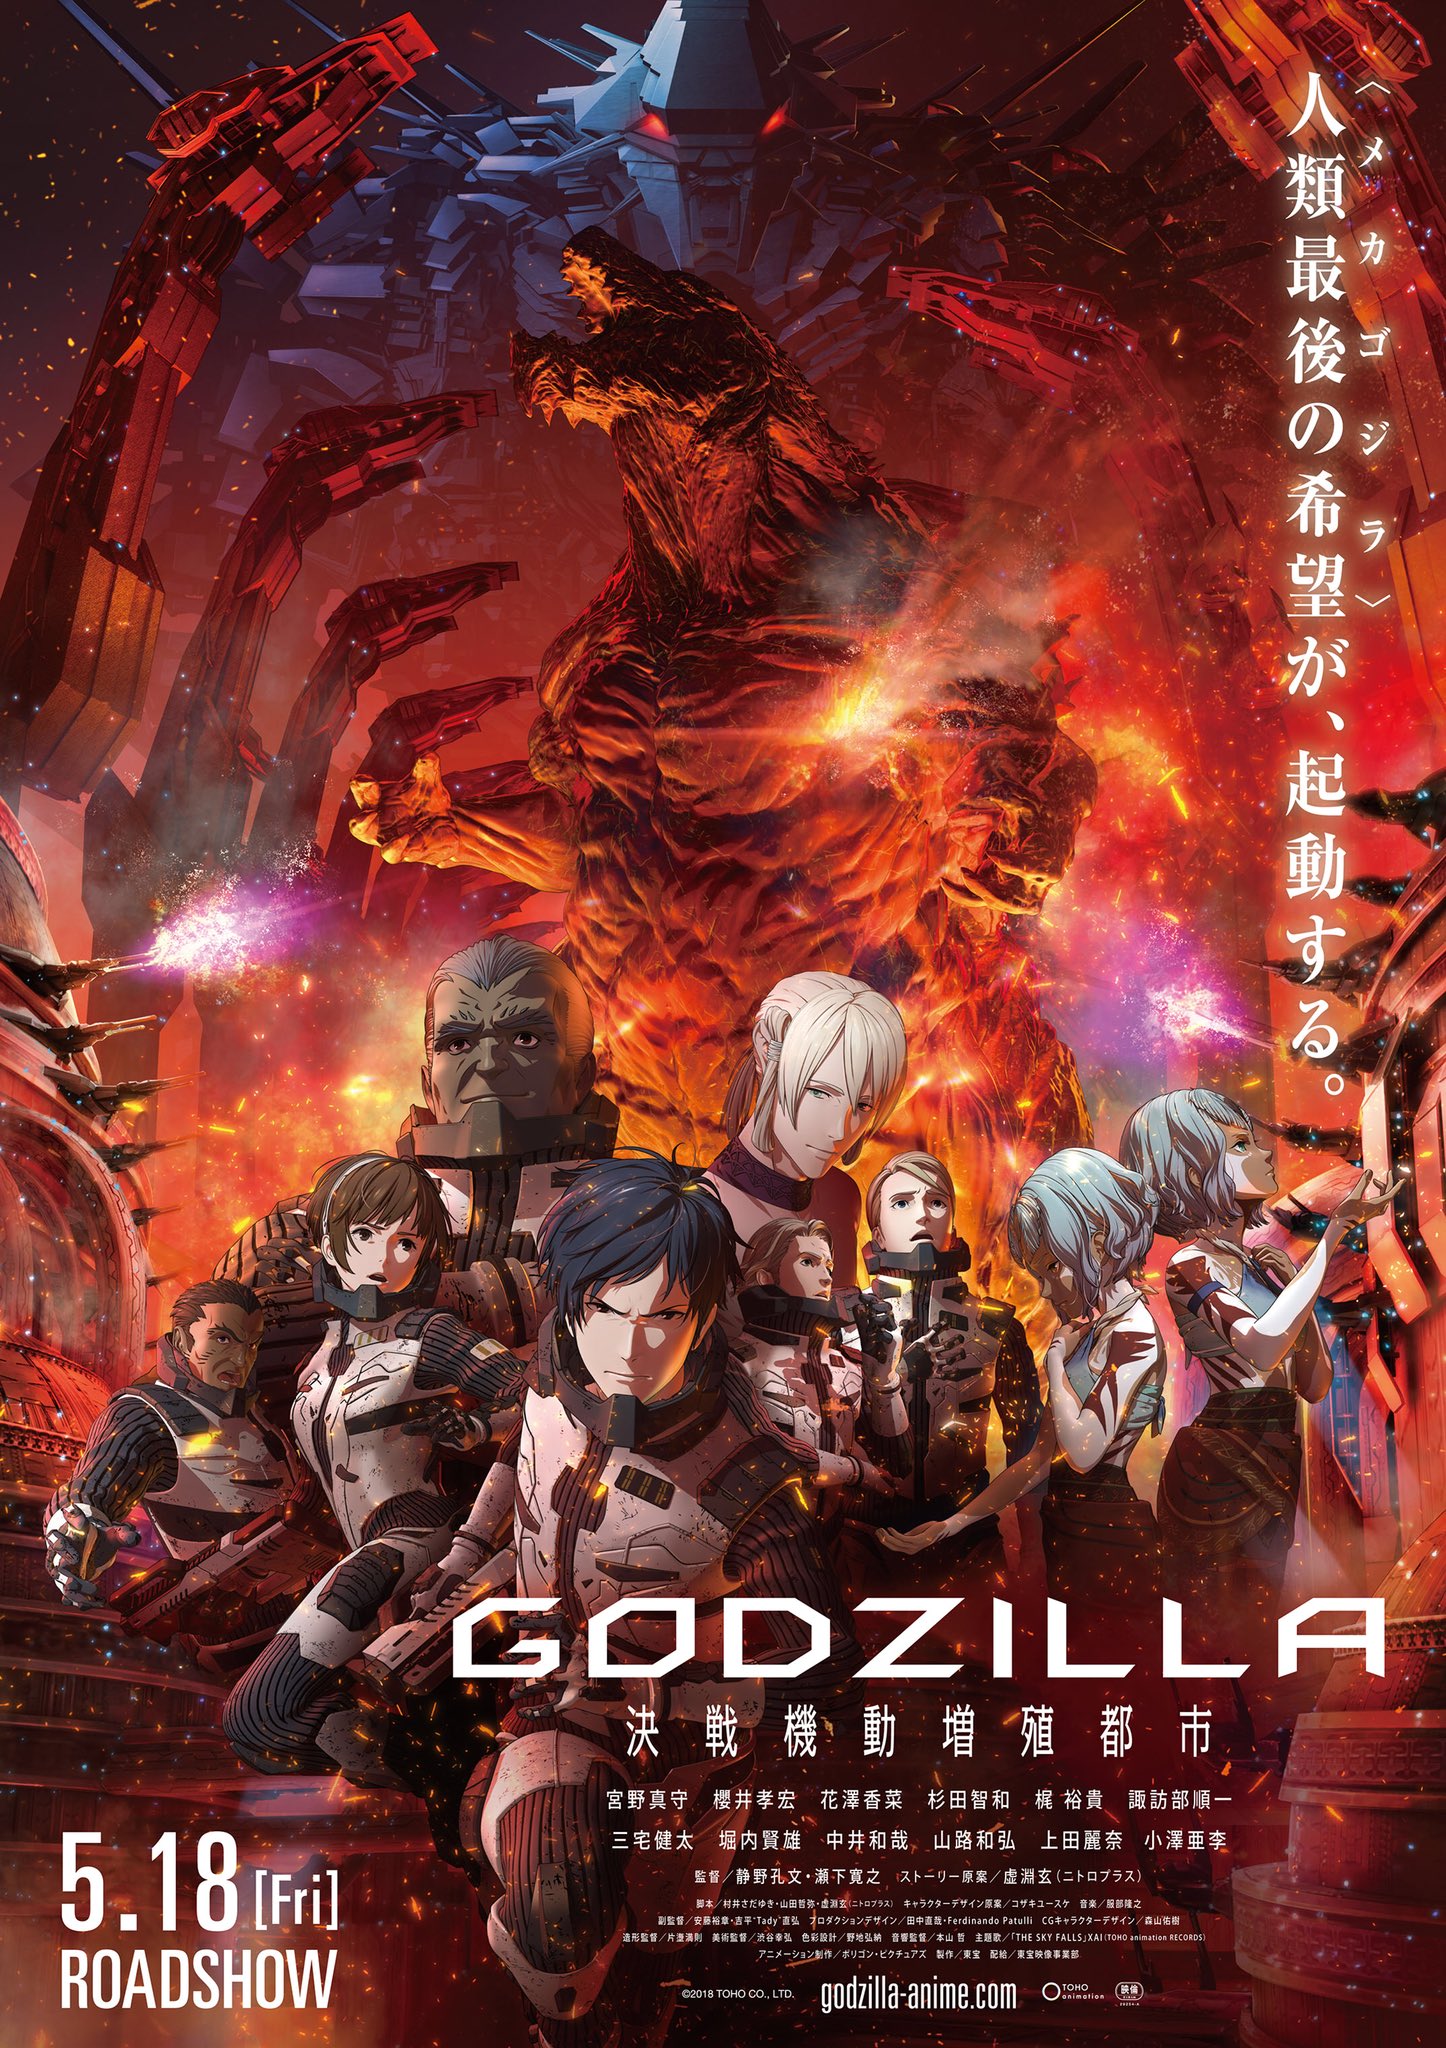 Godzilla Teases Epic Cameo in Upcoming Anime Film